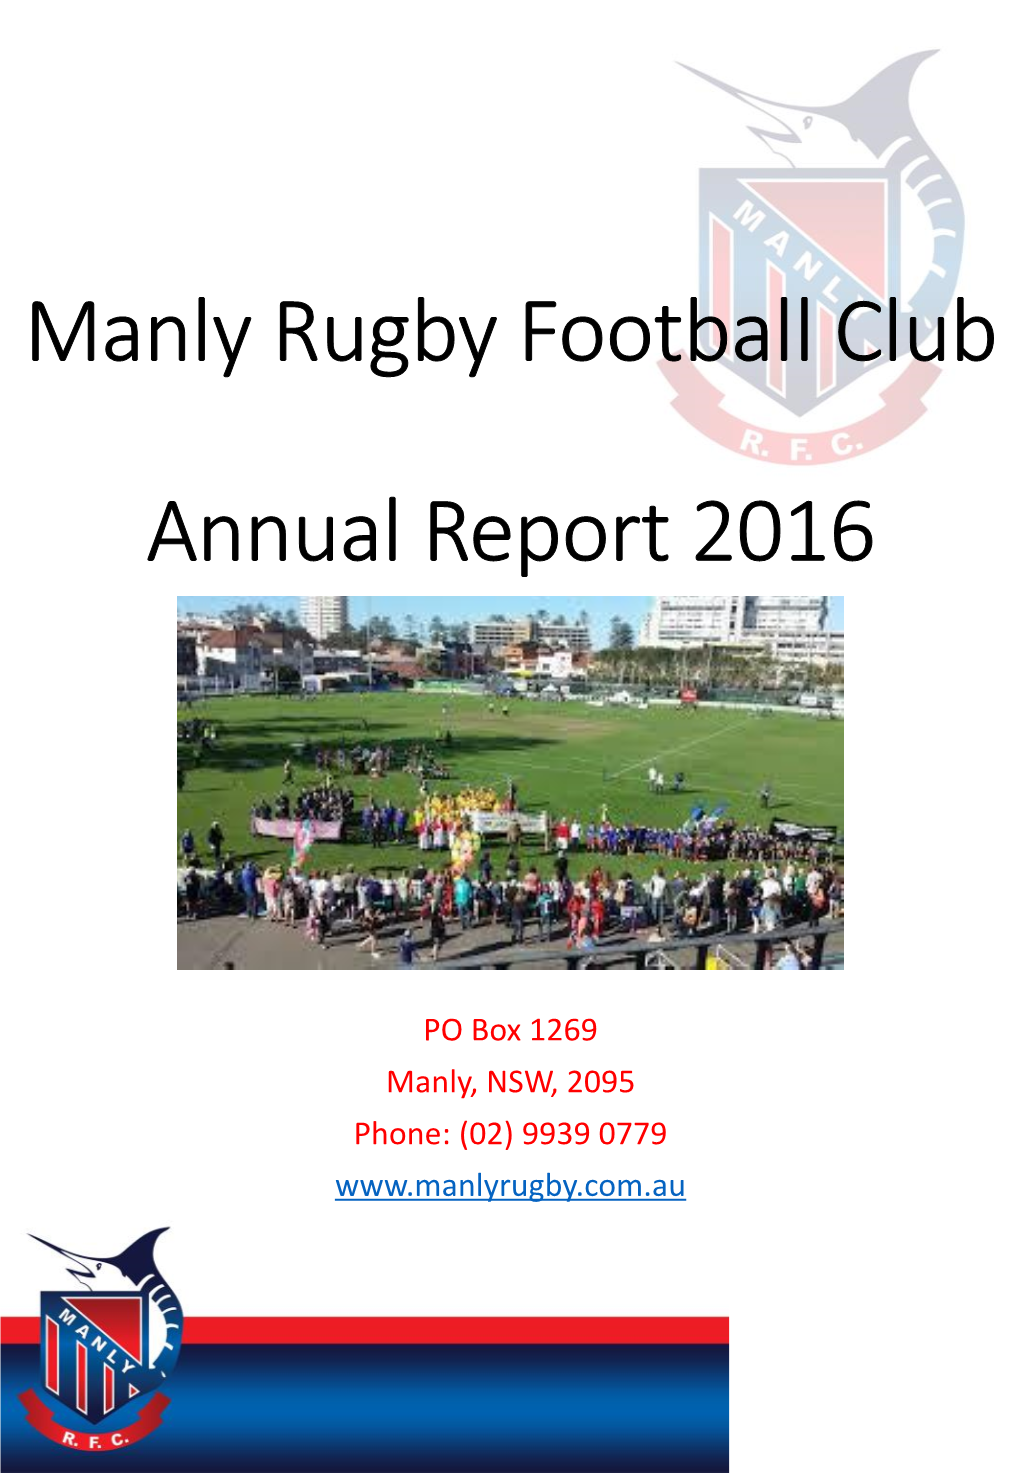 Manly Rugby Football Club Annual Report 2016